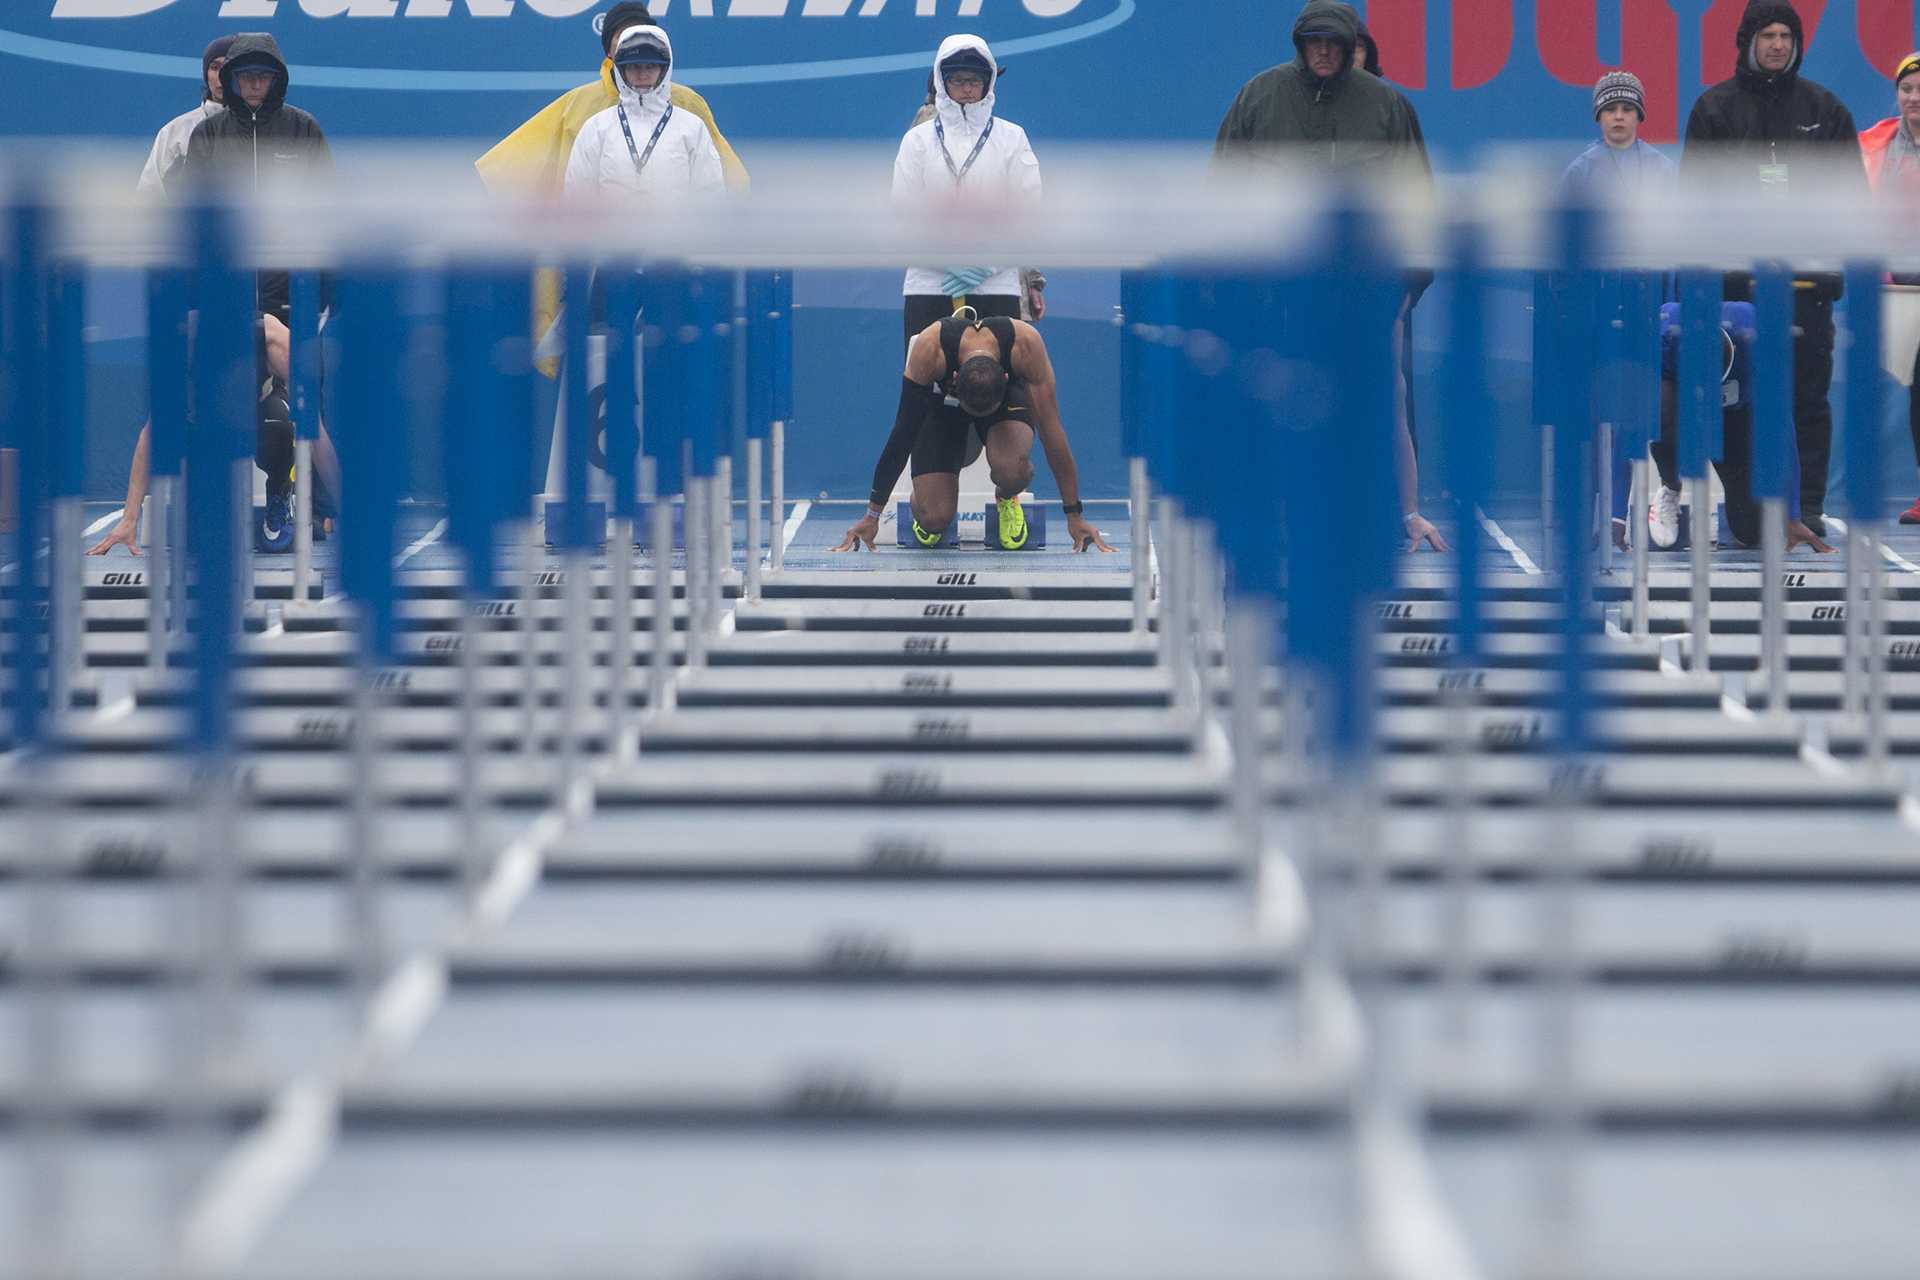 Iowas Aaron Mallet waits on starting blocks during the 110-meter hurdles at Drake Stadium during the Drake Relays on Saturday, April 29, 2017. Mallet won with a time of, 13.47. (The Daily Iowan/Joseph Cress)